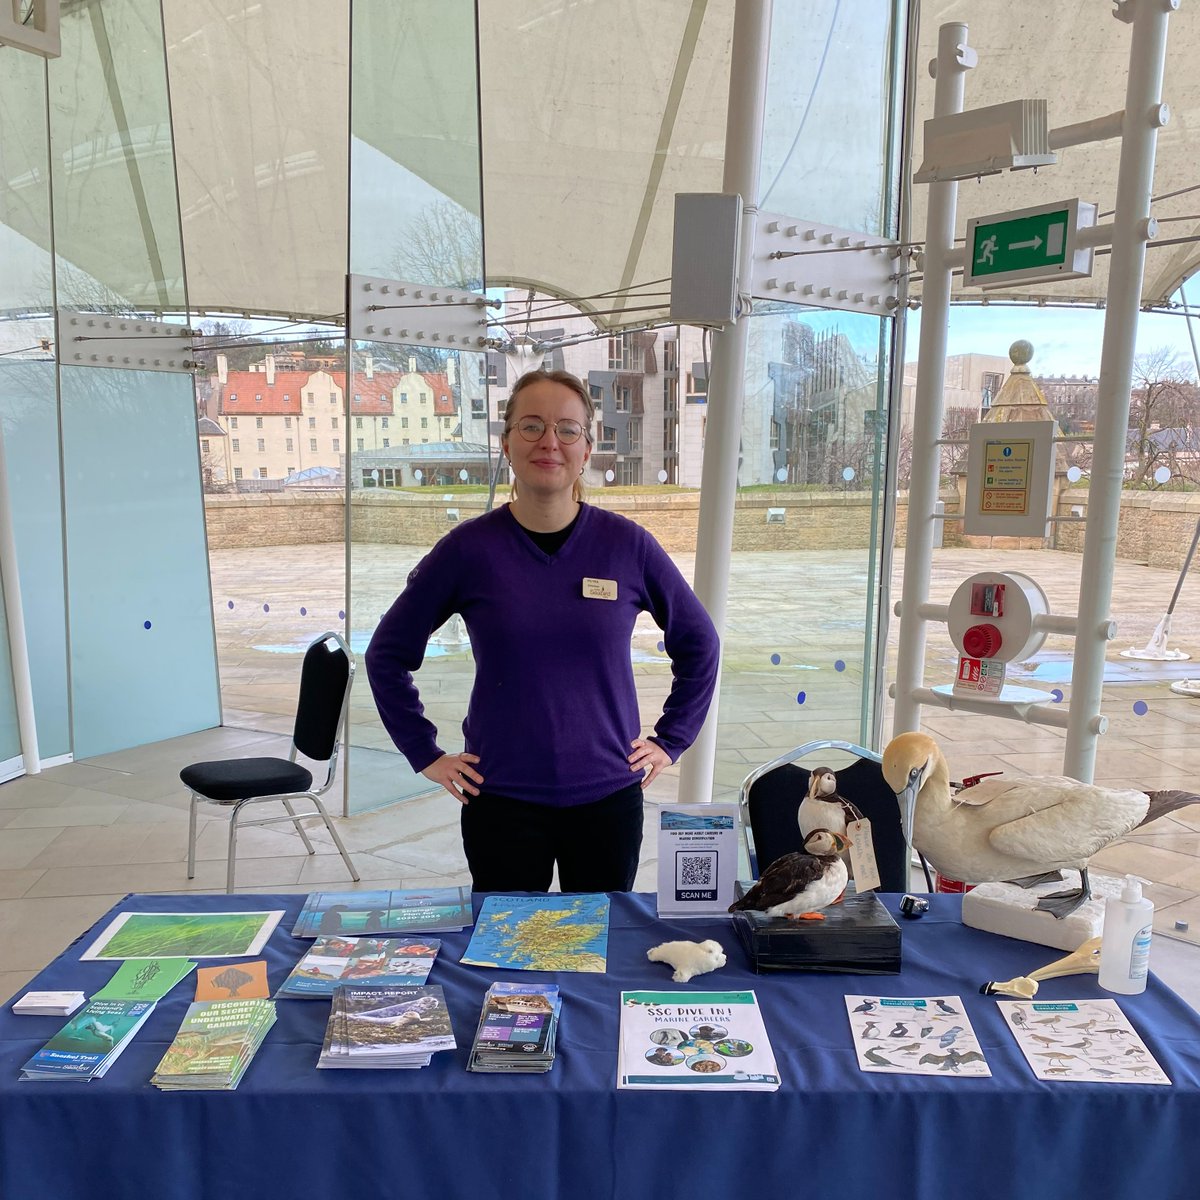 We're at @ourdynamicearth #marine careers showcase today, talking to students about the huge breadth of careers available in marine #science & #conservation.

Come along and say hello👋, there are lots of brilliant organisations to talk to.